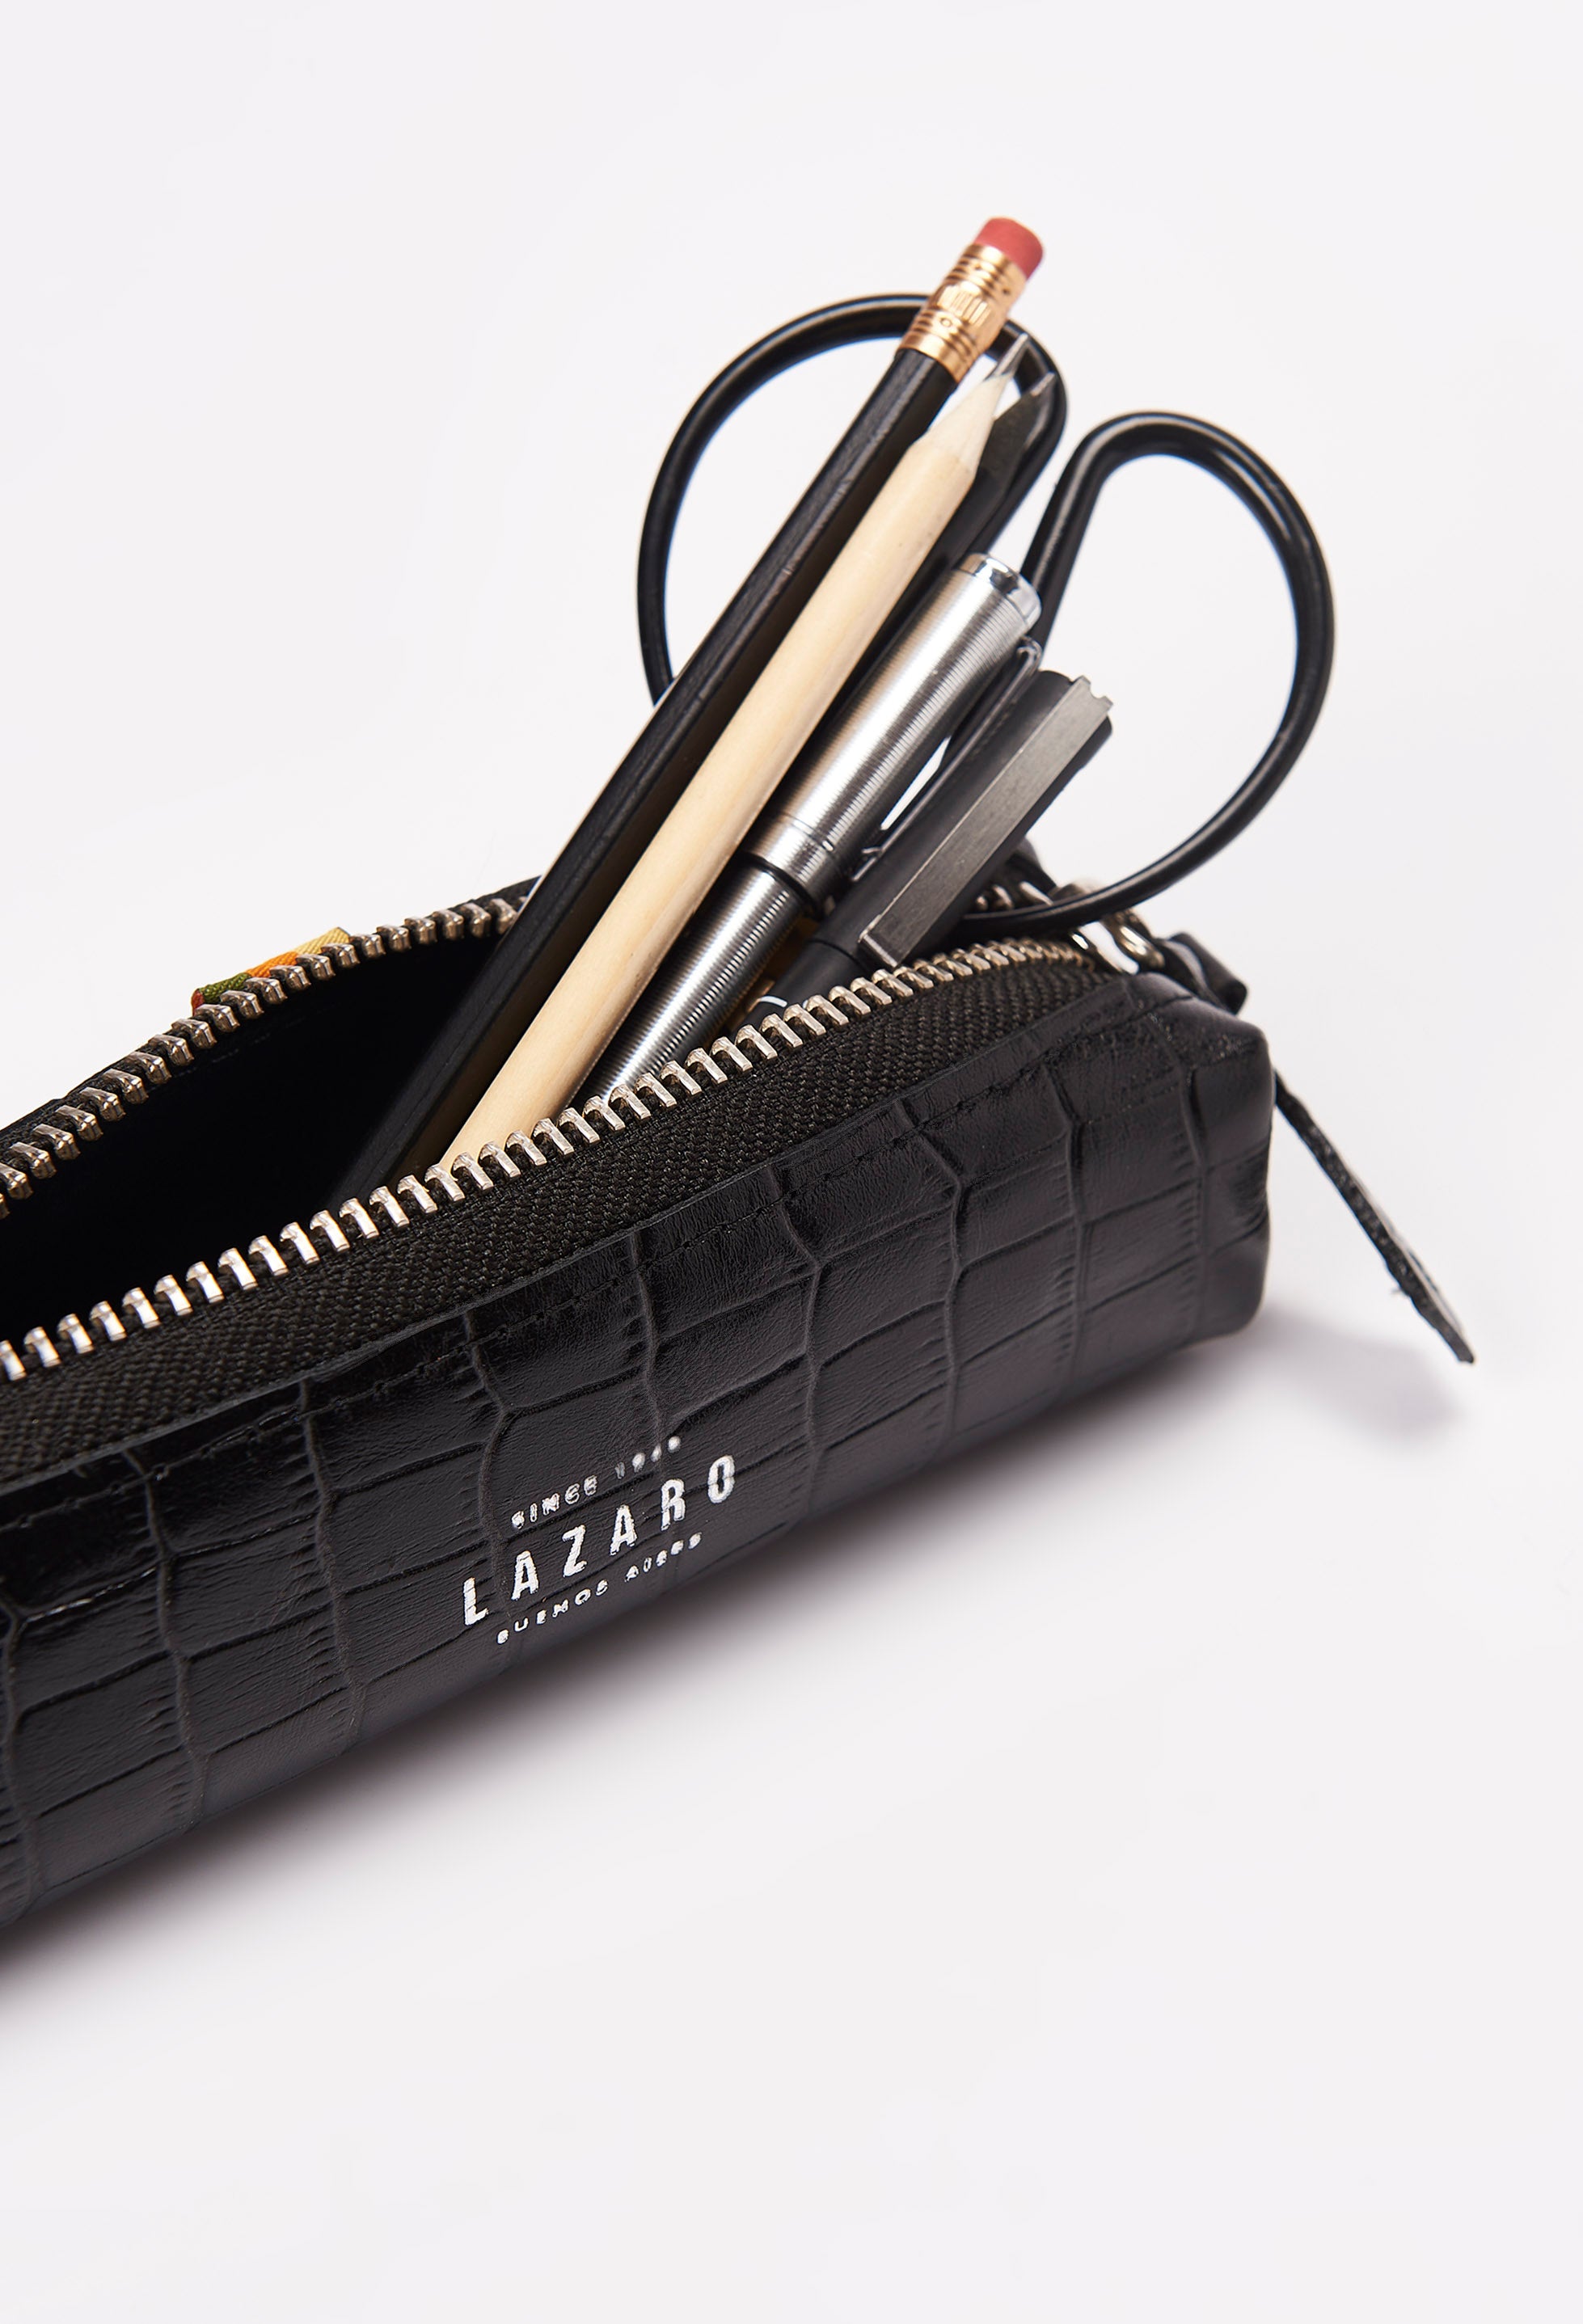 Interior of a Black Croco Leather Pencil Case packed with pens, pencils and a scissor.